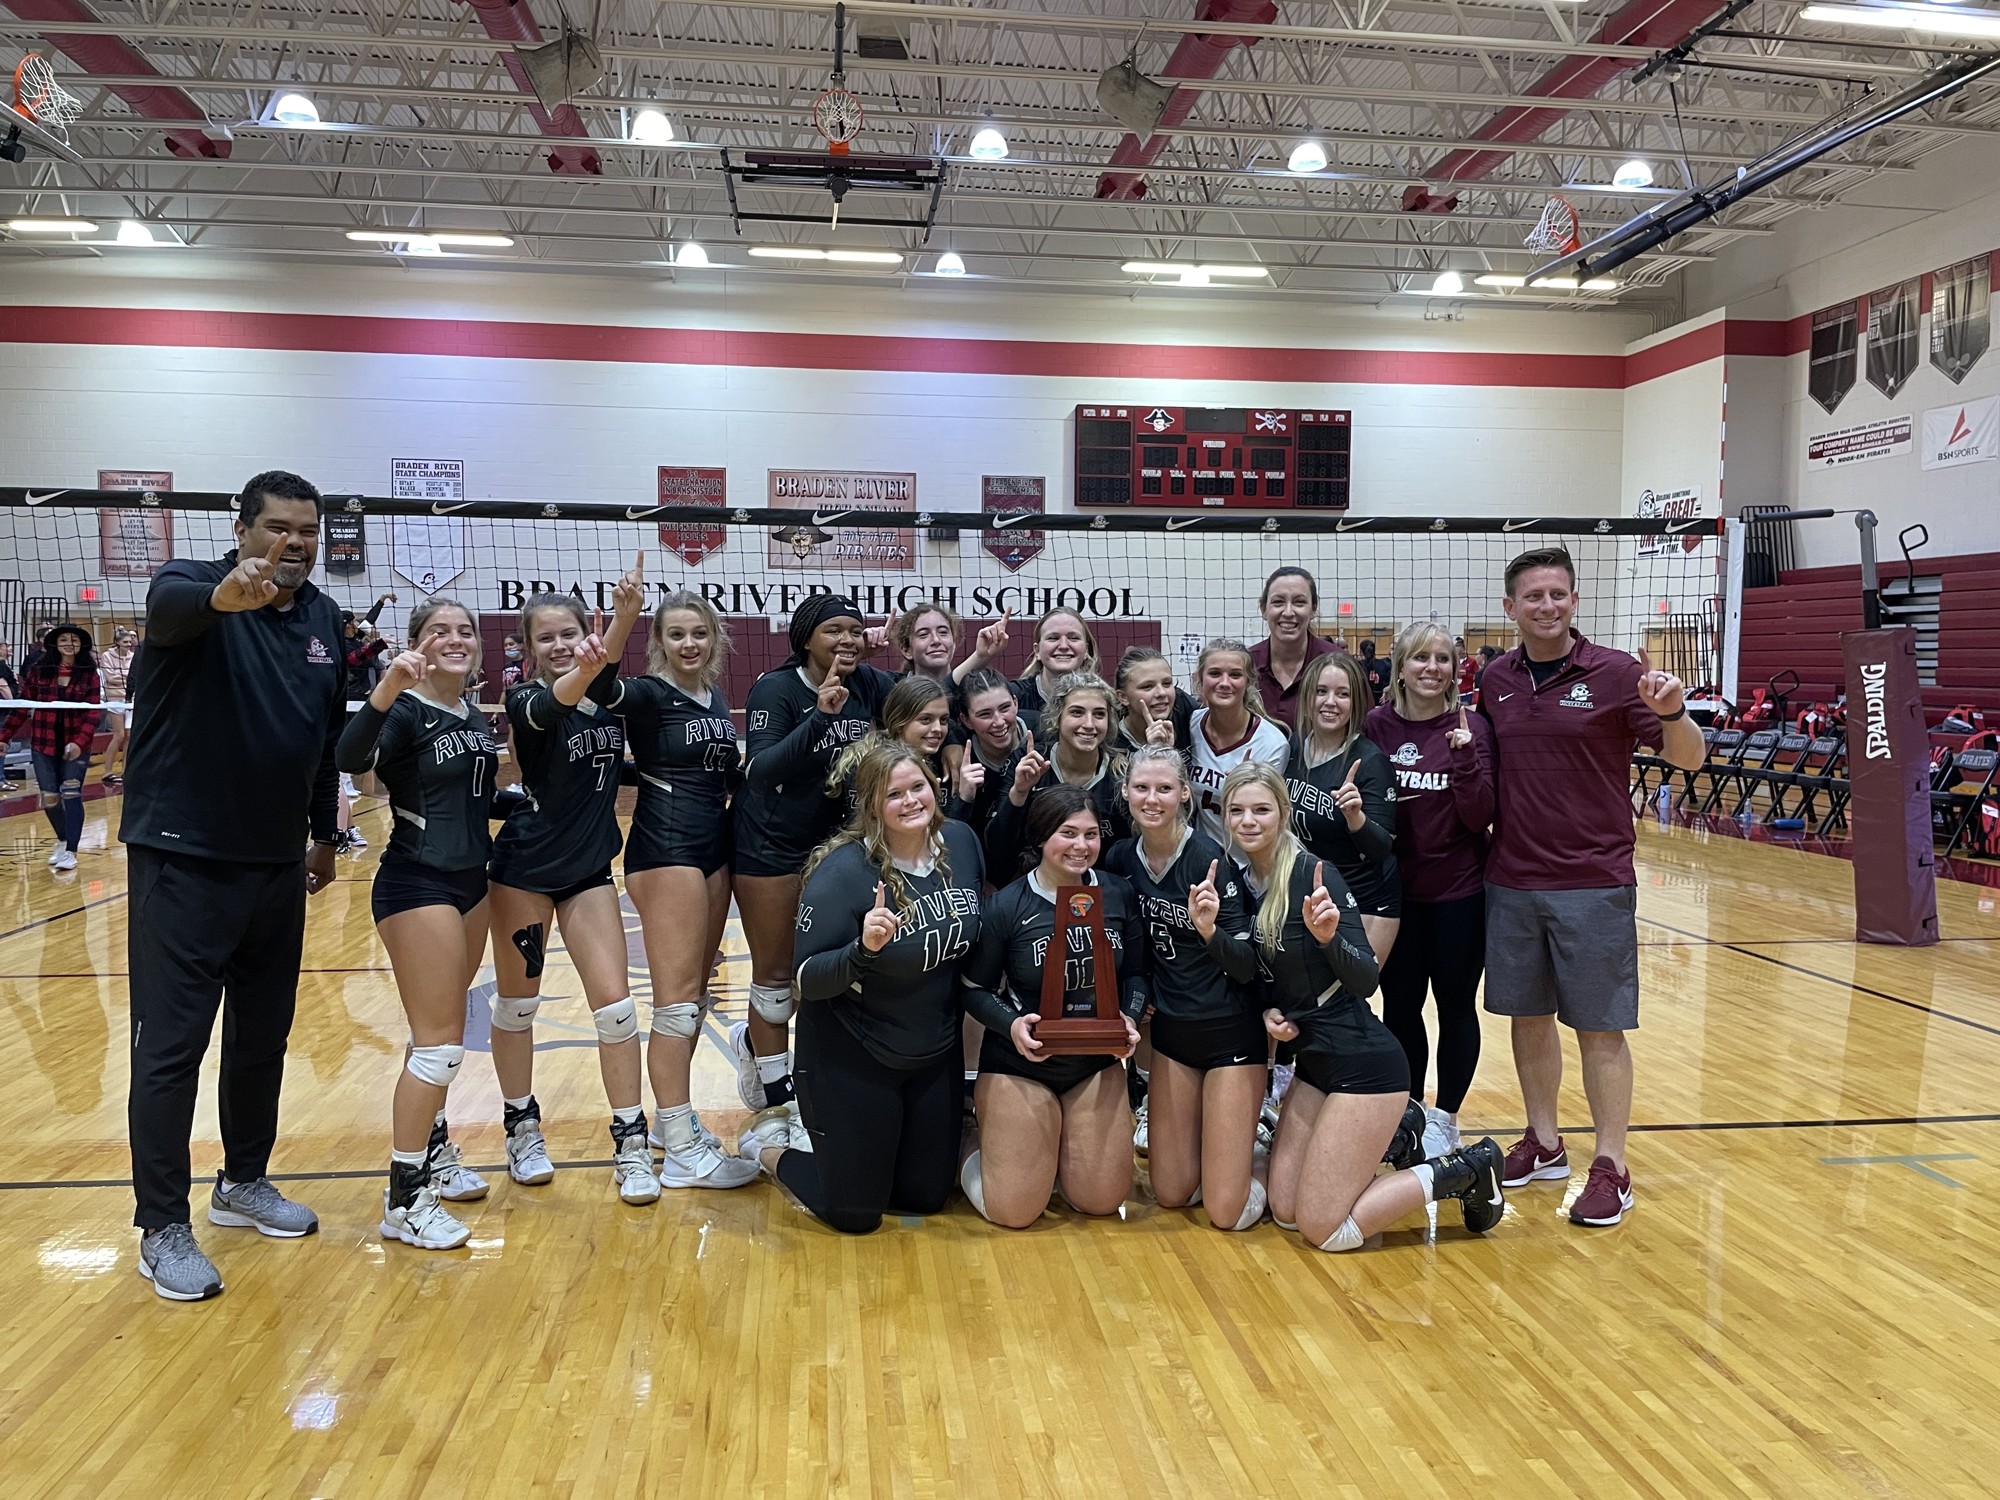 In 2021, the Braden River High volleyball team won its district for the first time since 2010 and is looking to repeat in 2022 thanks to most of its core returning. (File photo.)